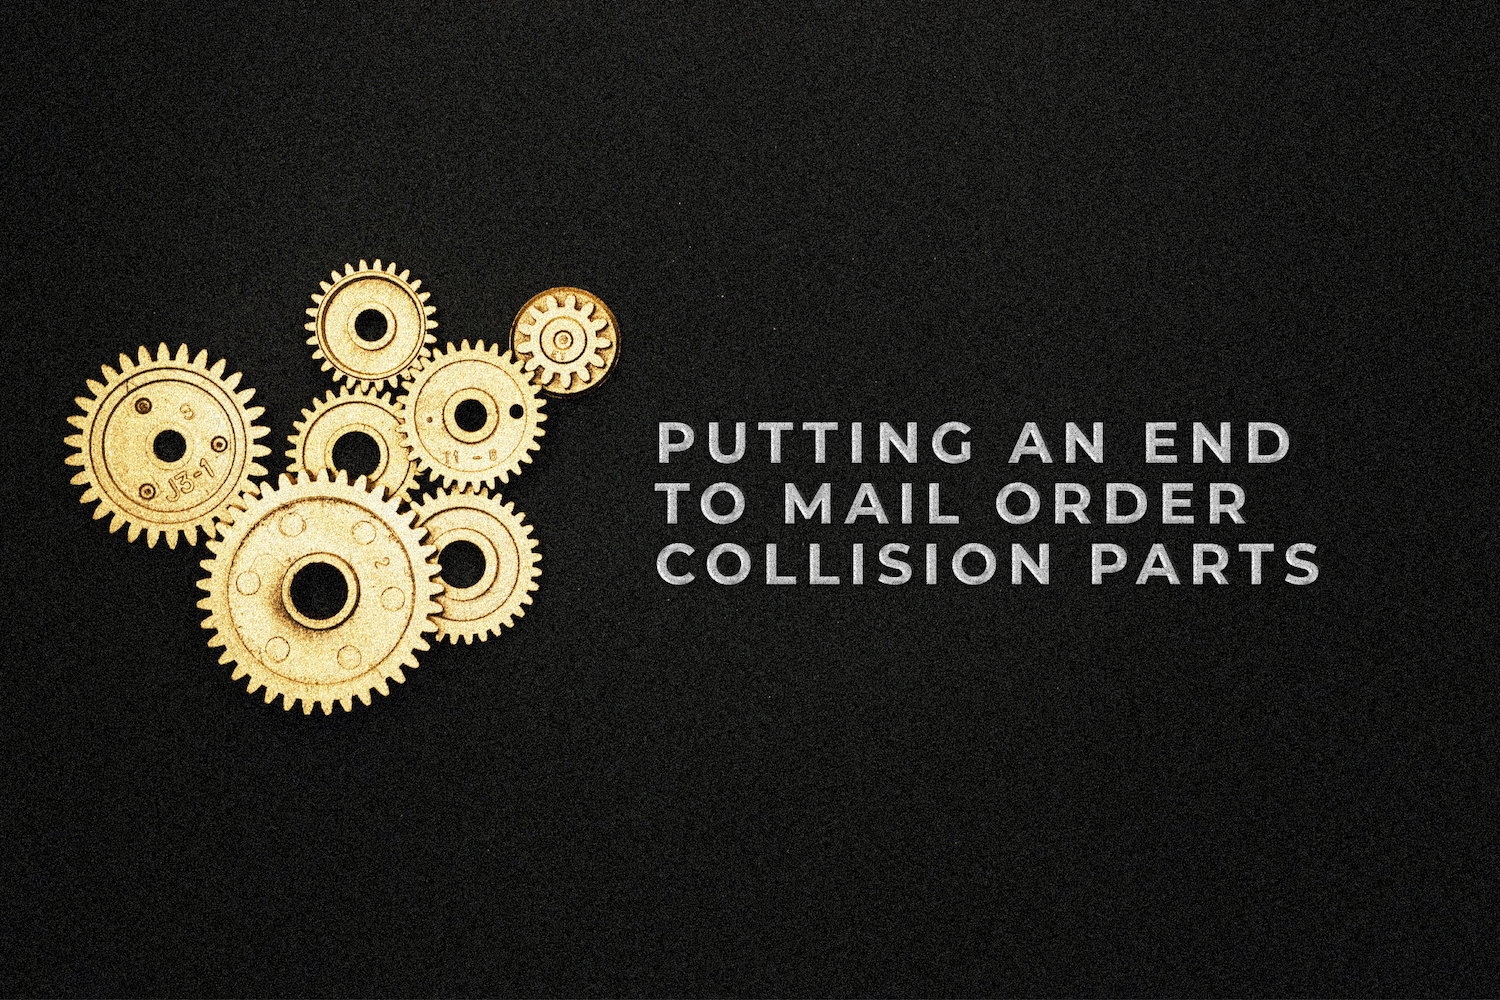 There used to only be one way to order collision parts—by print catalog.